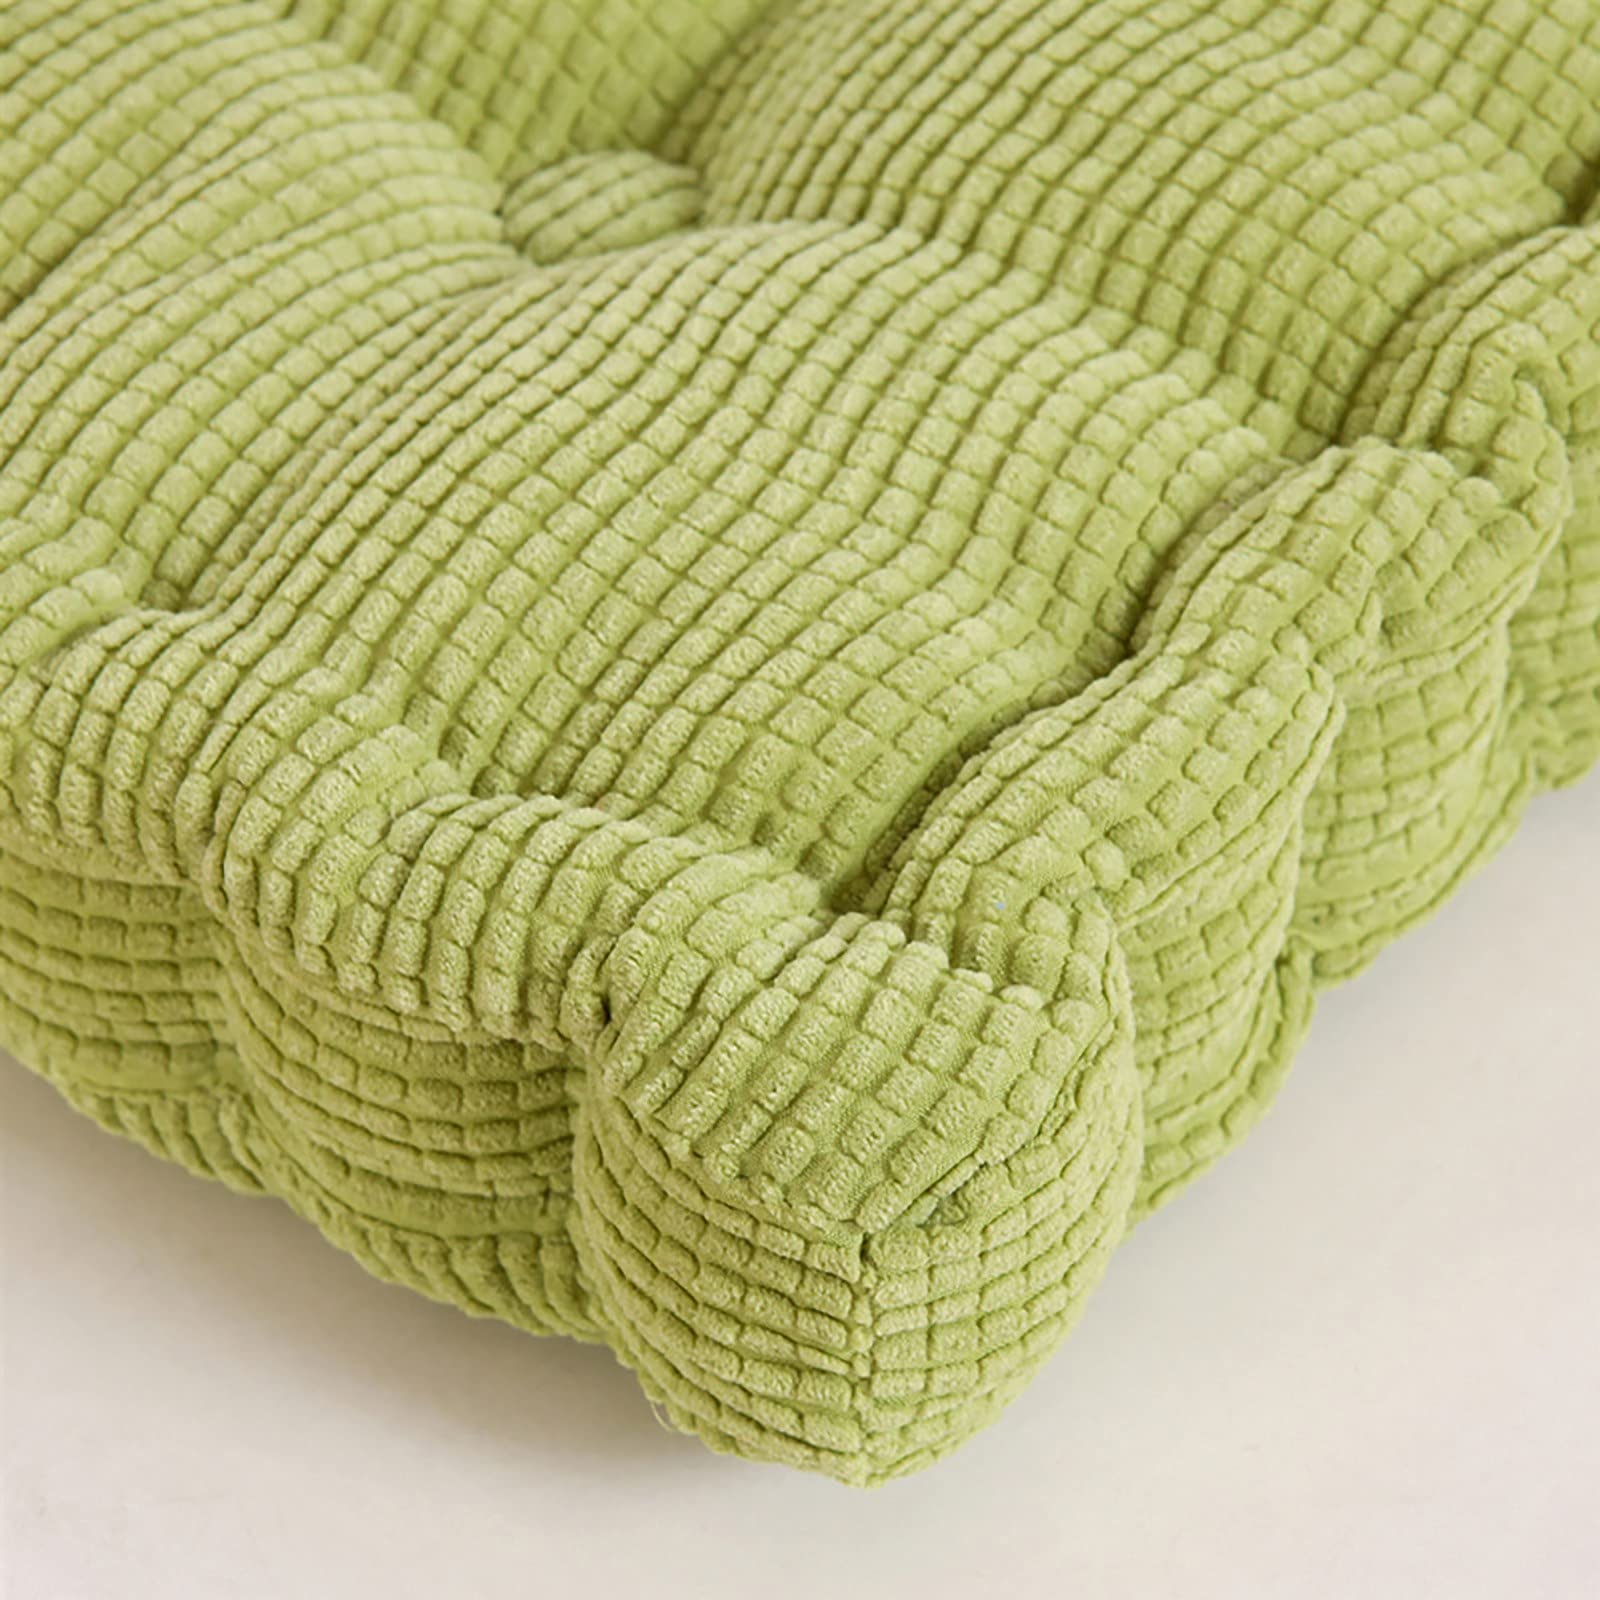 18"x18" Square Comfortable Seat Cushions Home Pillow Indoor Corduroy Chair Pads Cushion for Living Room, Bedroom, Study Room, Dining Room, Balcony Office or Car(Green)